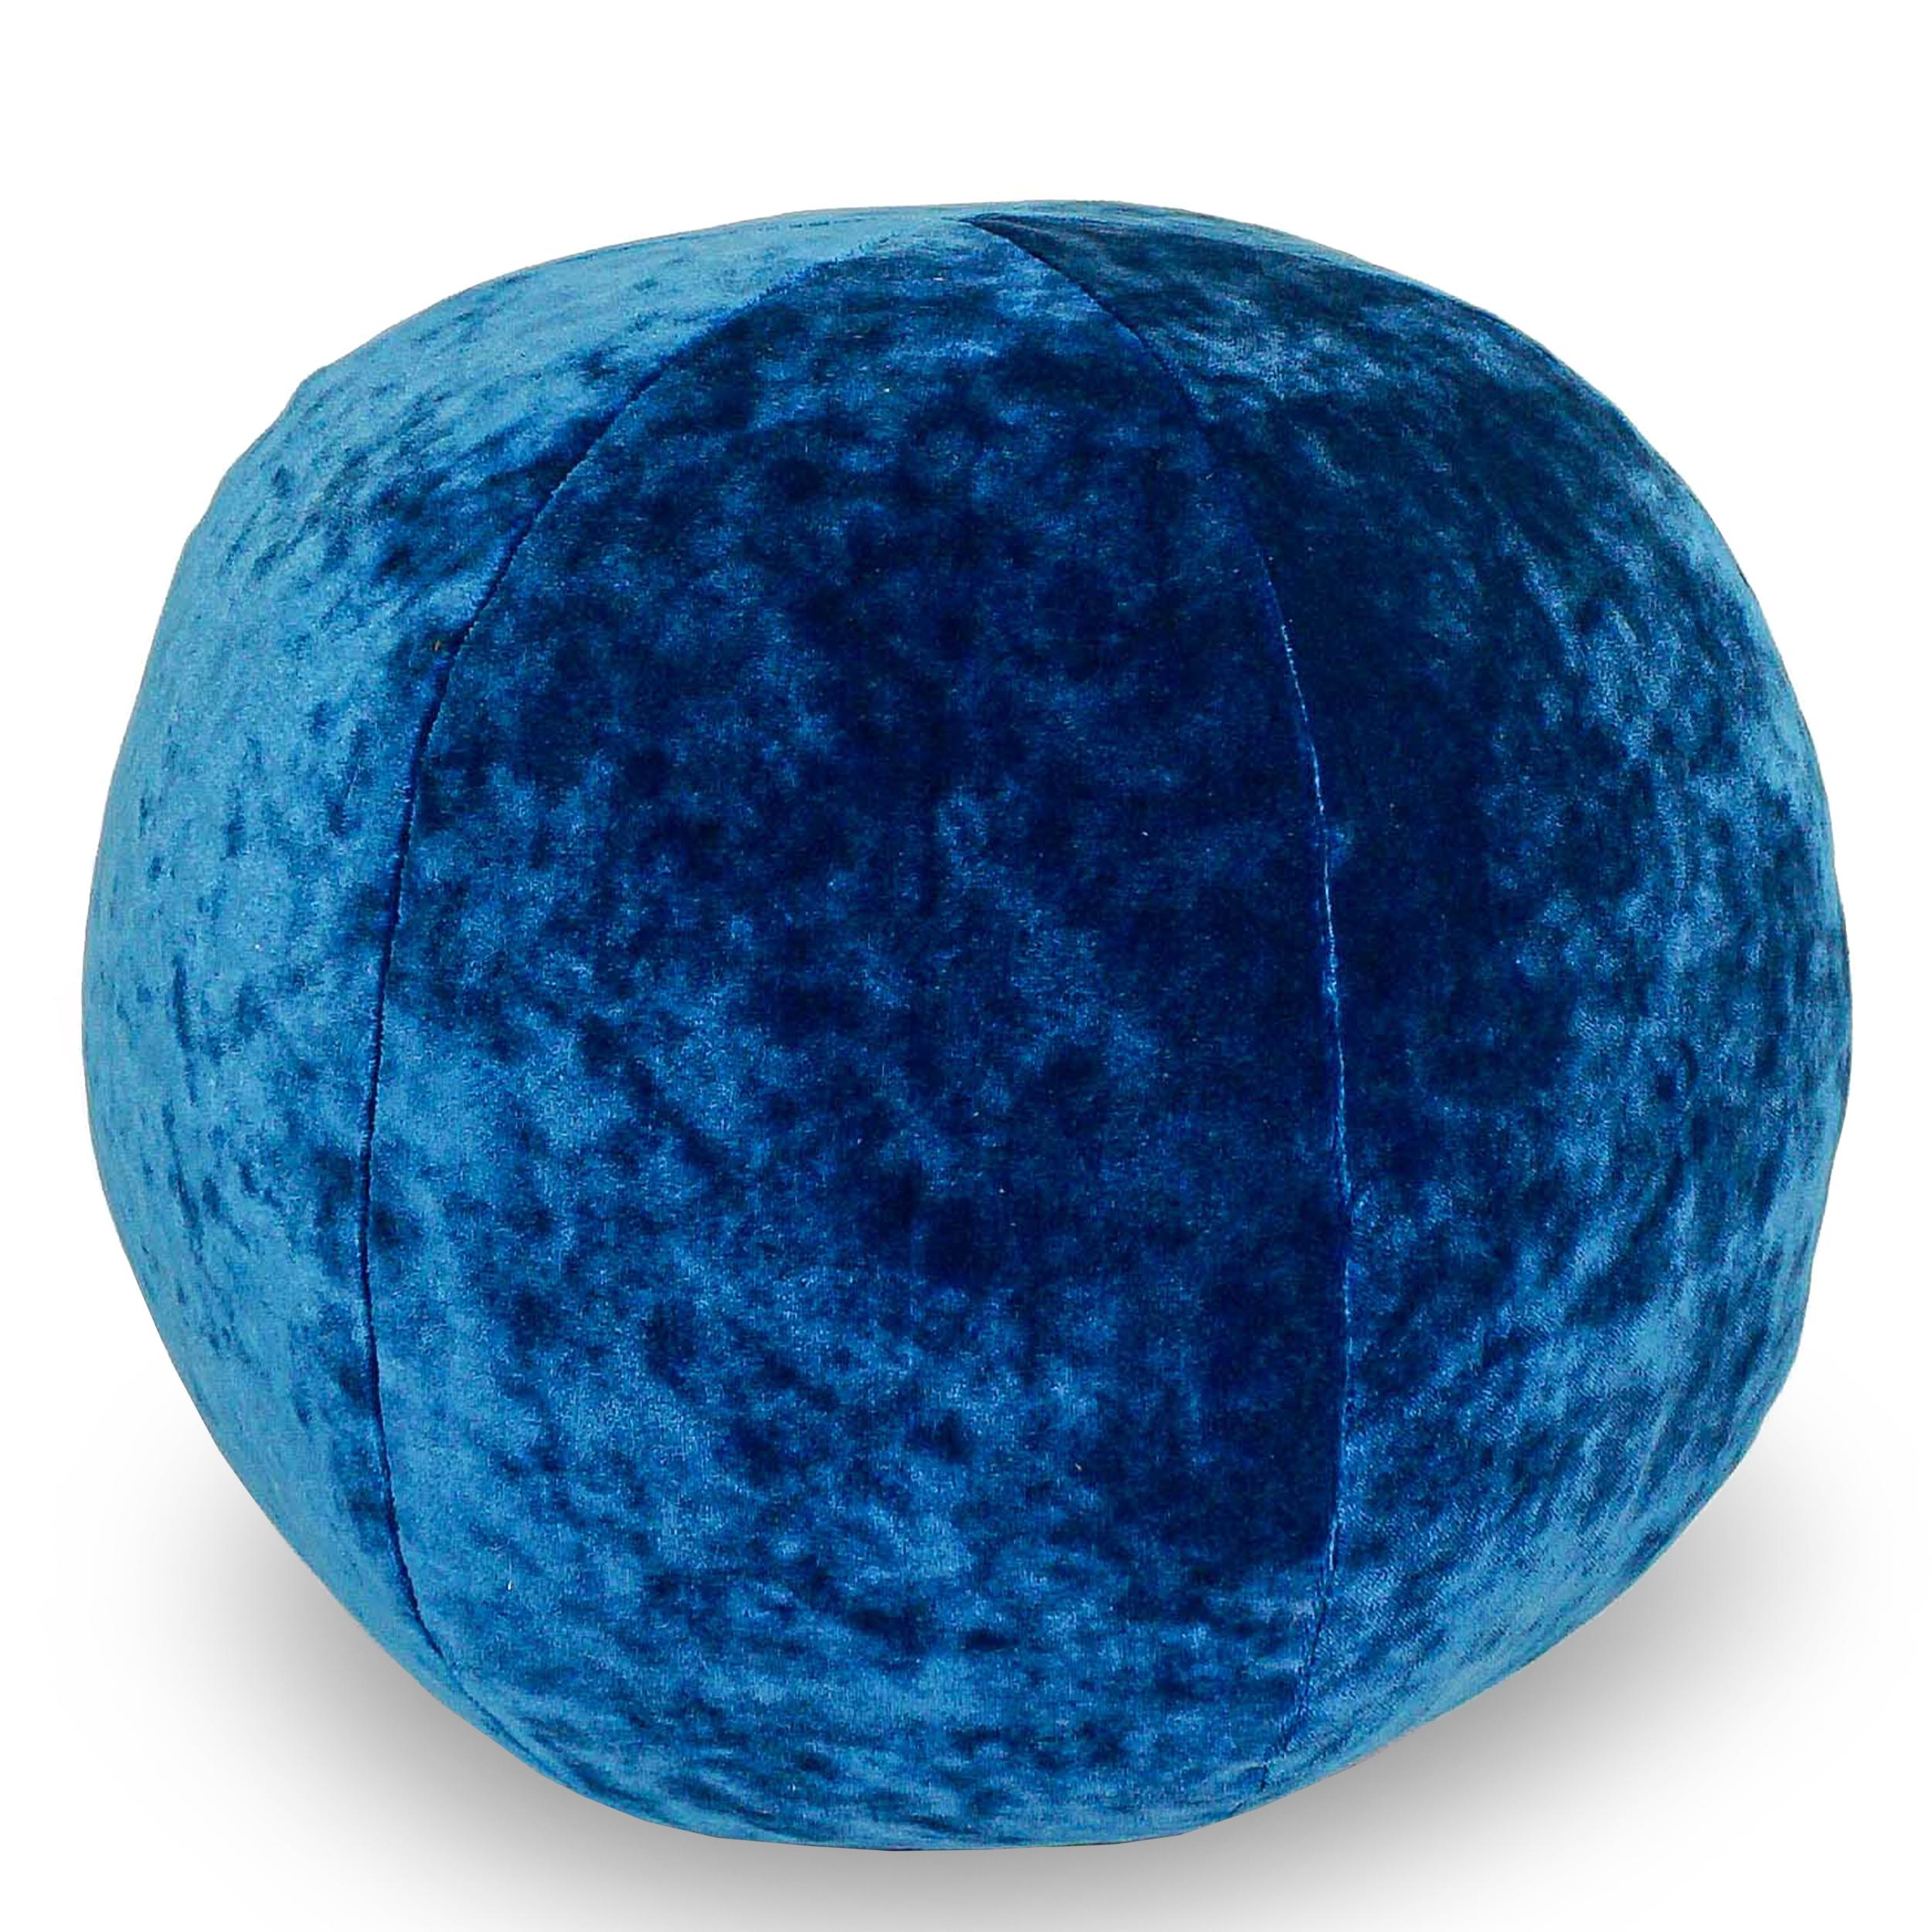 Electric blue crushed velvet ball pillow. Can be customized in size and fabric.

Measurements:
Outside: 12” diameter x 12” height
Disclaimer: Due to their handcrafted nature, the final size and shape of our Ball Pillows may vary depending on the